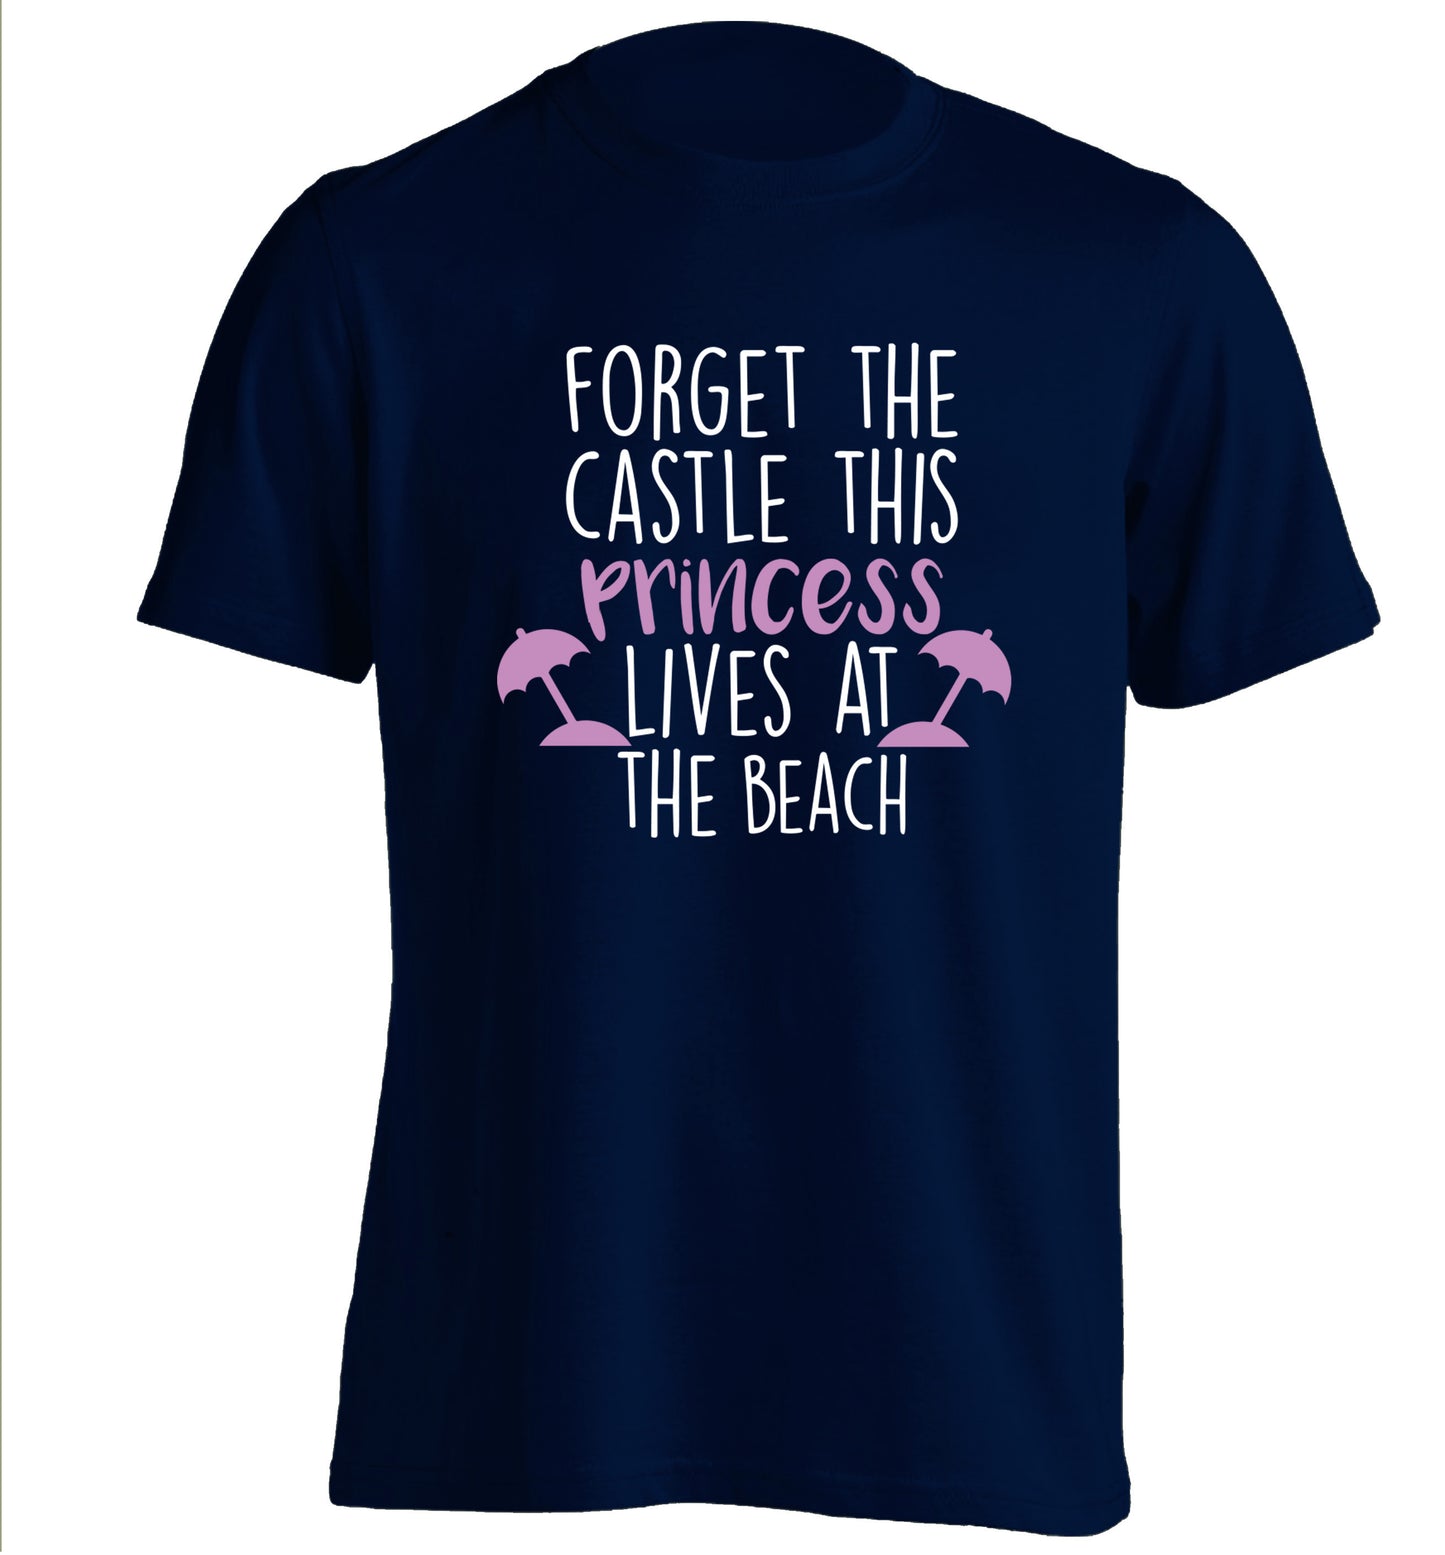 Forget the castle this princess lives at the beach adults unisex navy Tshirt 2XL